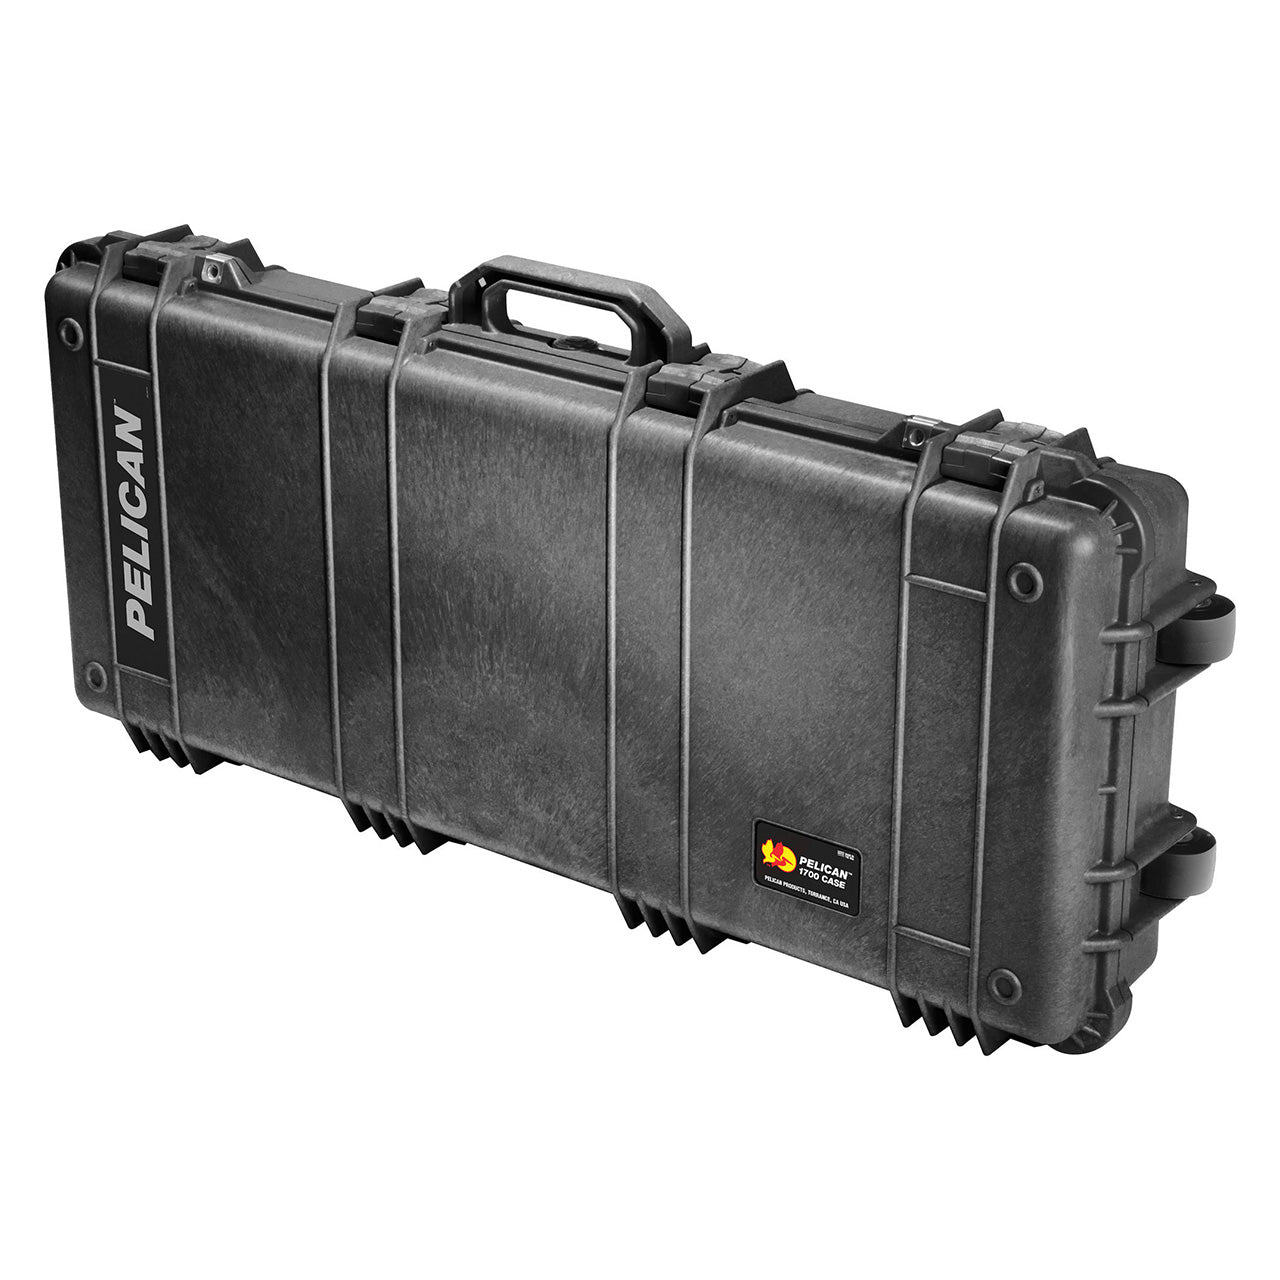 Pelican 1700 Long Protector Case Watertight Dustproof Unbreakable Hard Weapon Casing with Wheels, Foldable Side Handle, Foam Set, Automatic Pressure Equalization Valve (Black)